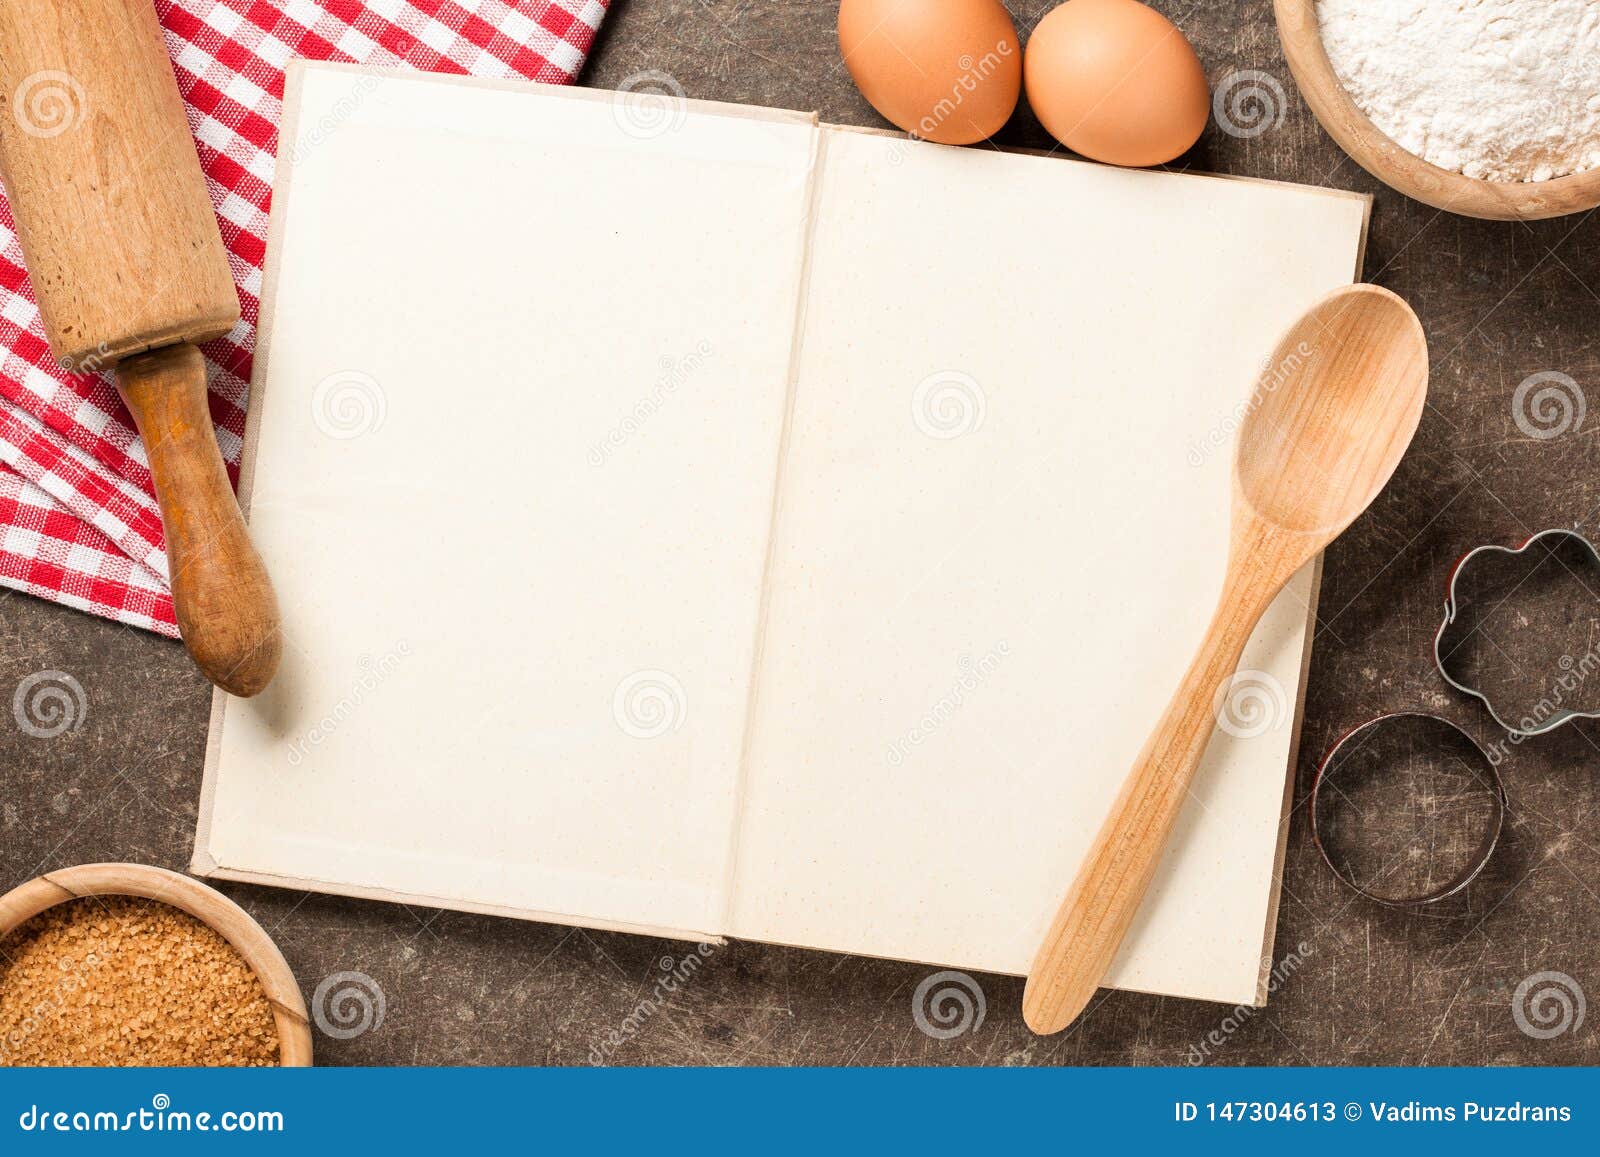 Baking Concept with Cookbook and Ingredients Stock Image - Image of ...